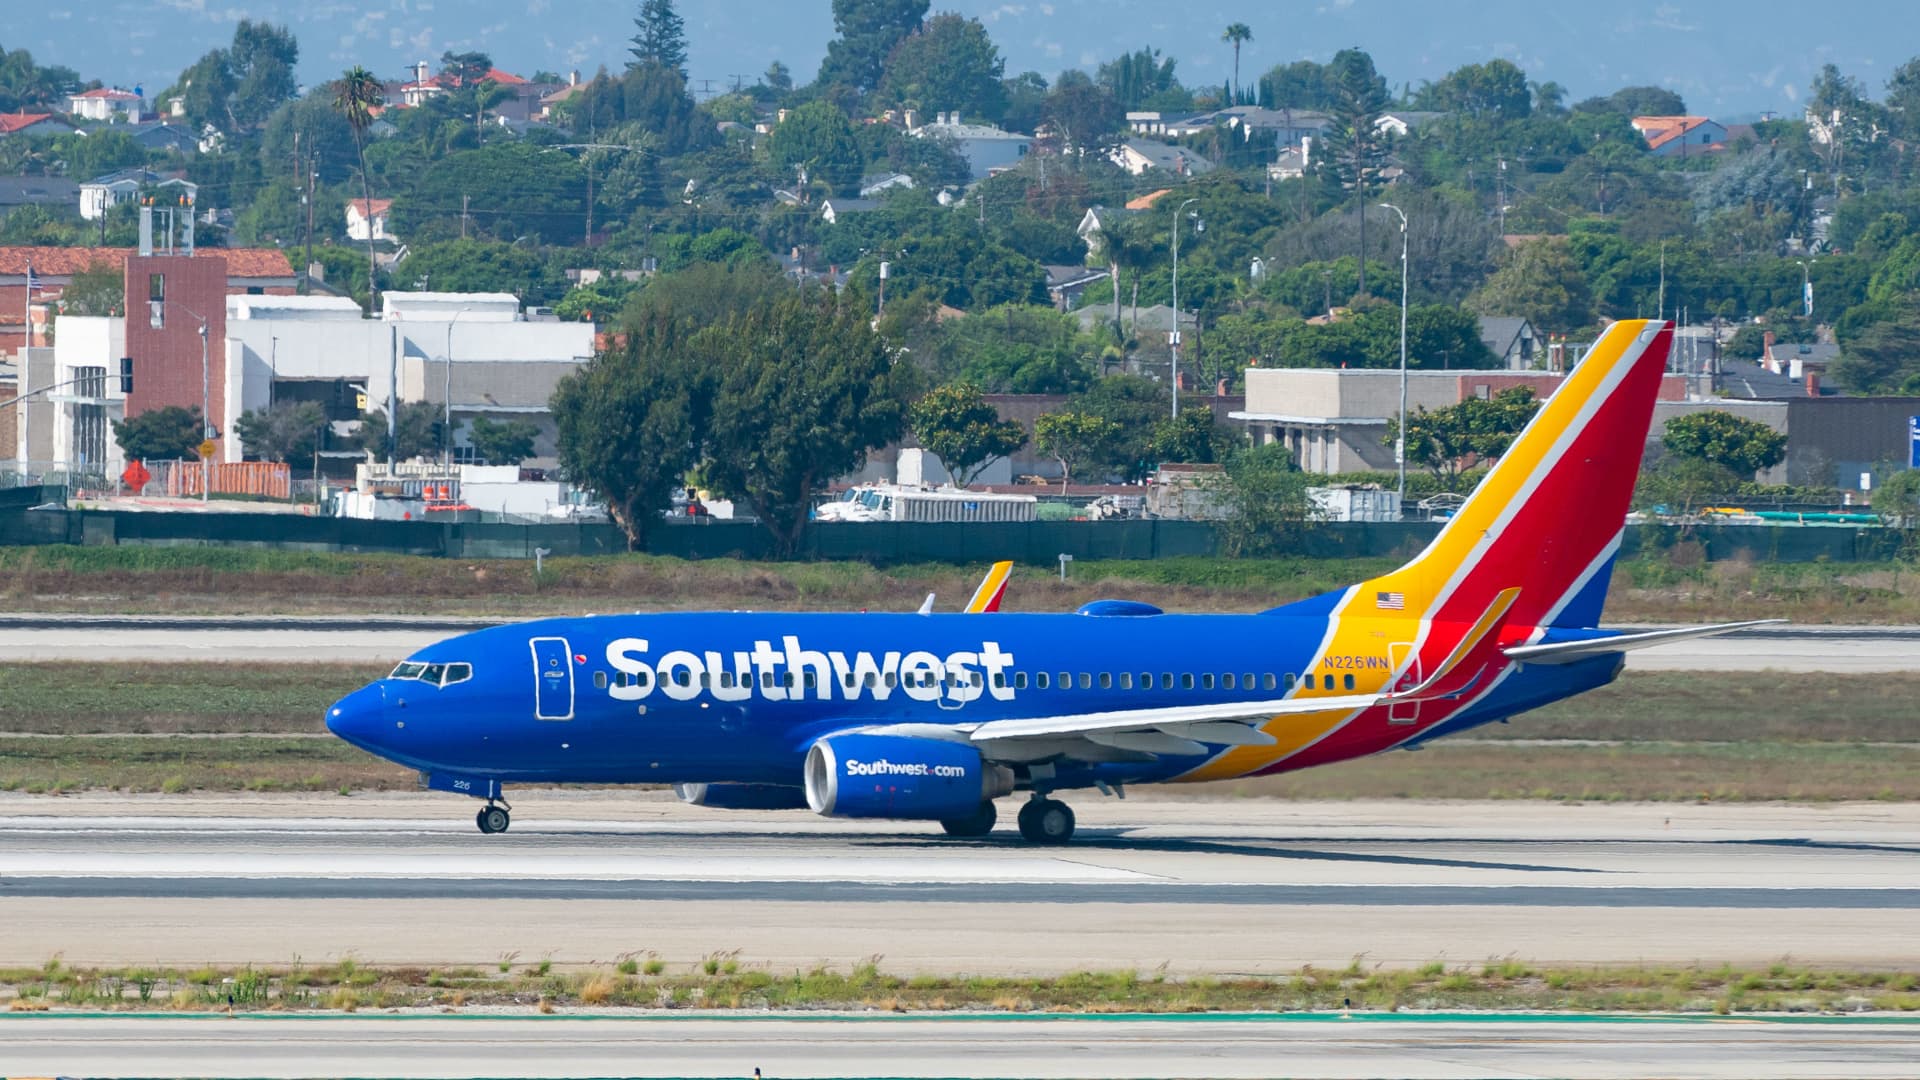 Southwest Airlines, pilots’ union attain preliminary labor deal after years of contentious talks